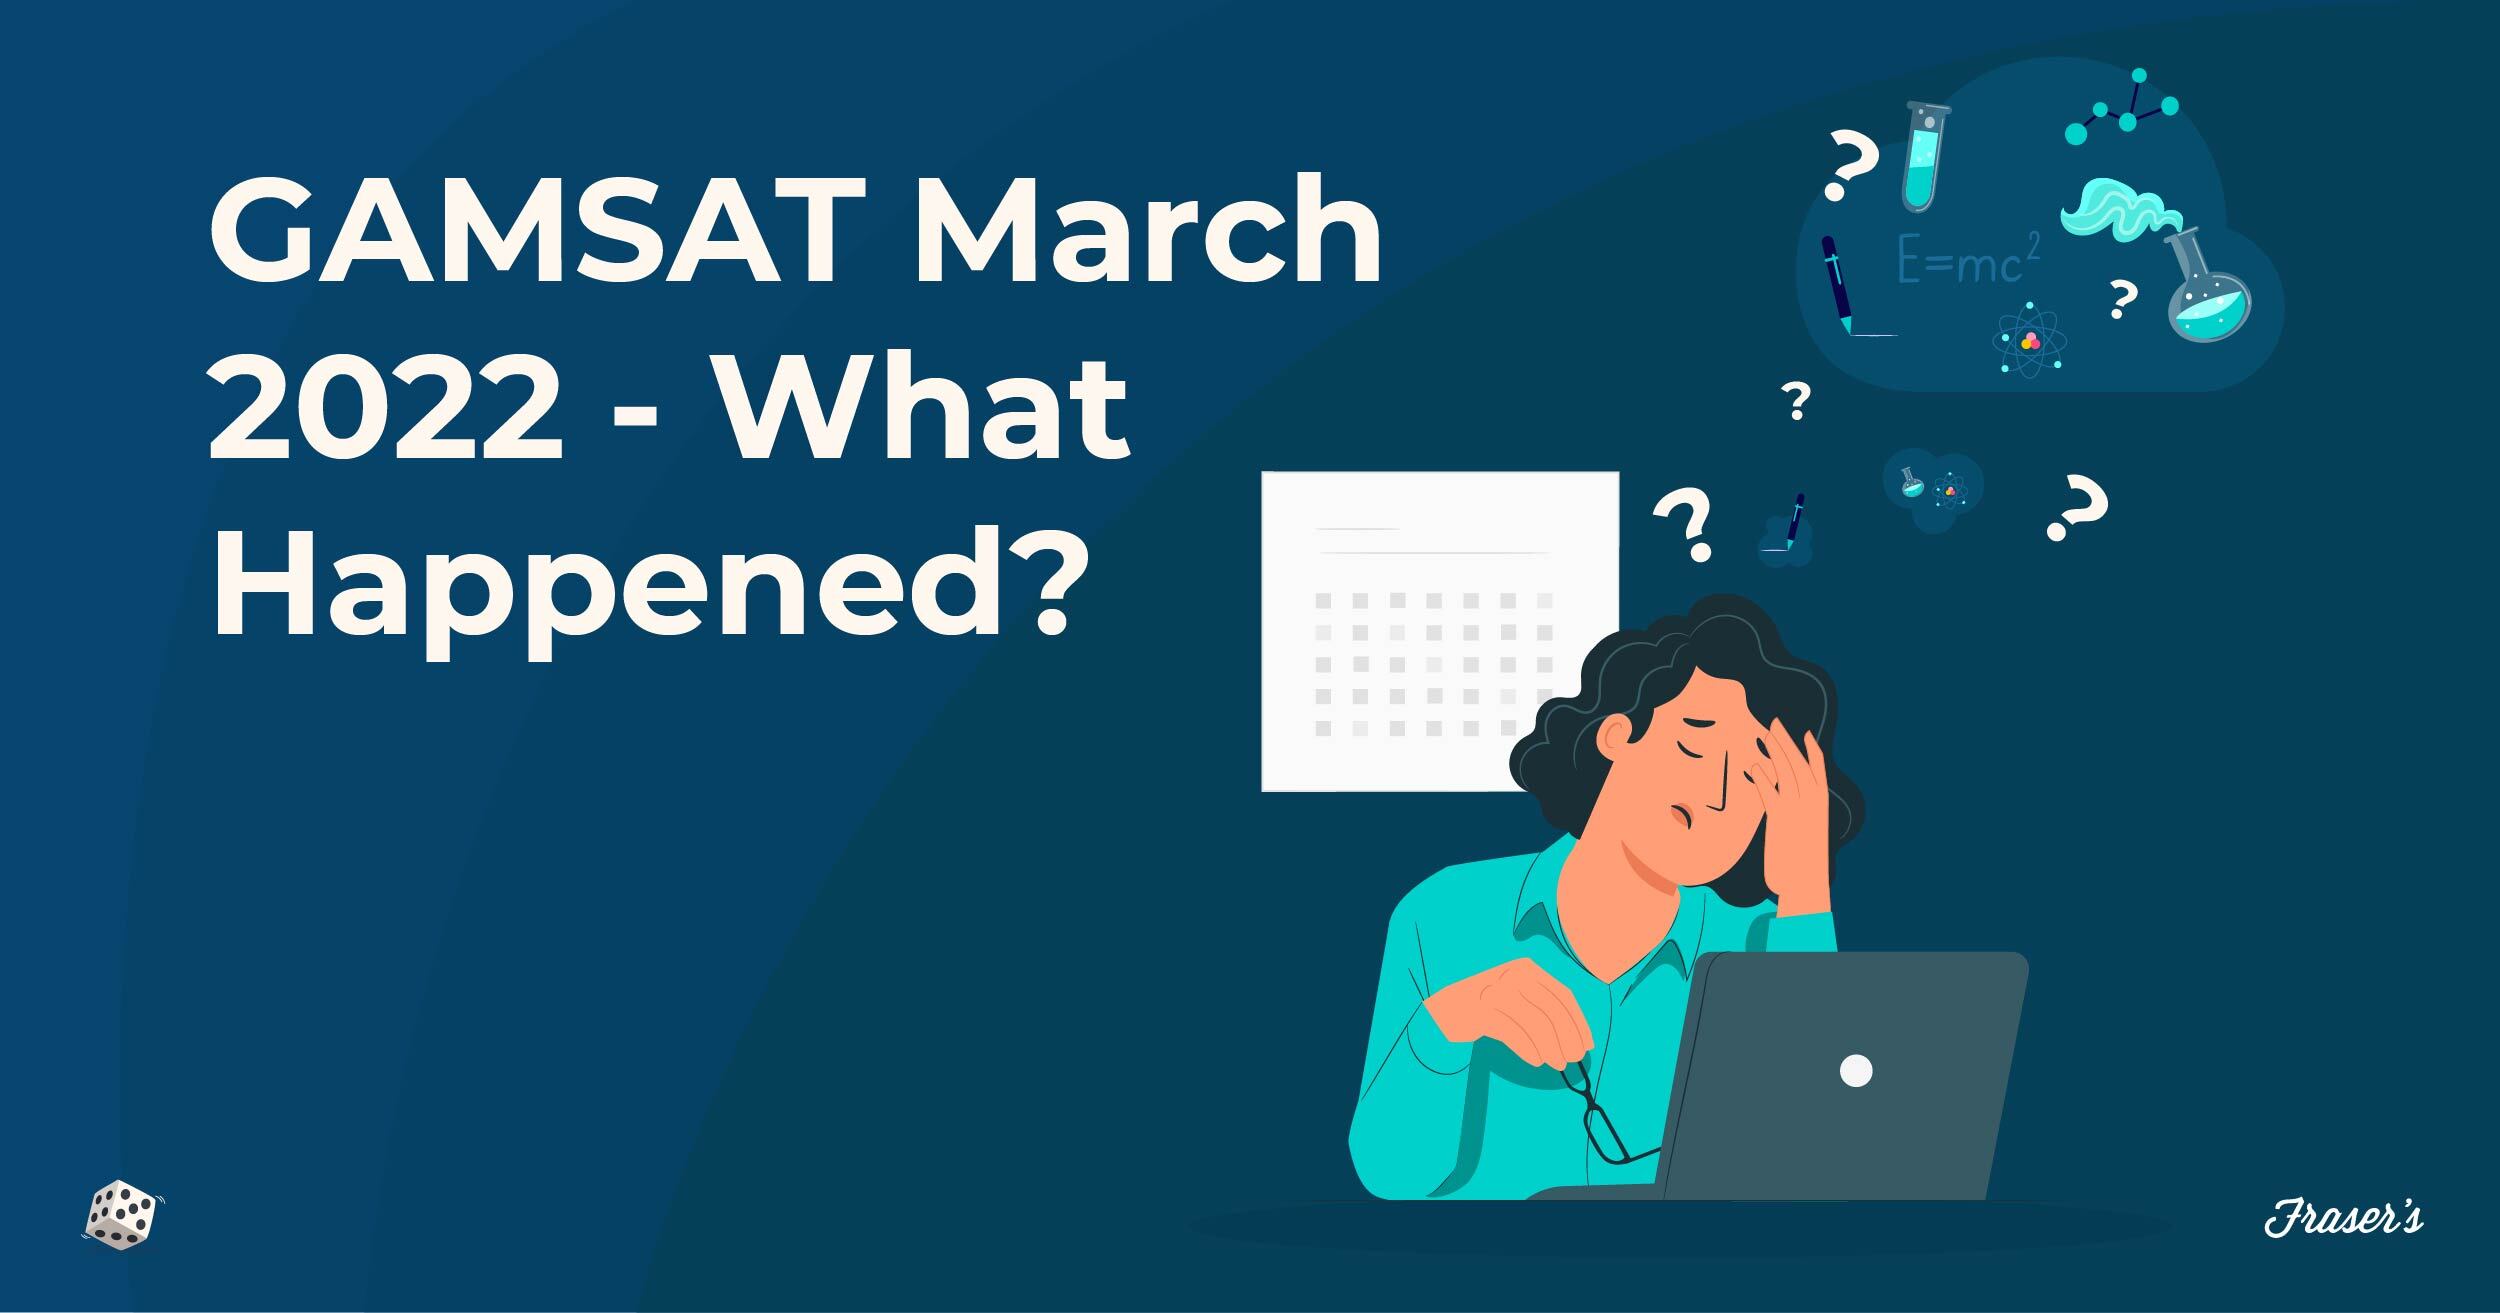 gamsat march 2022 - what happened?